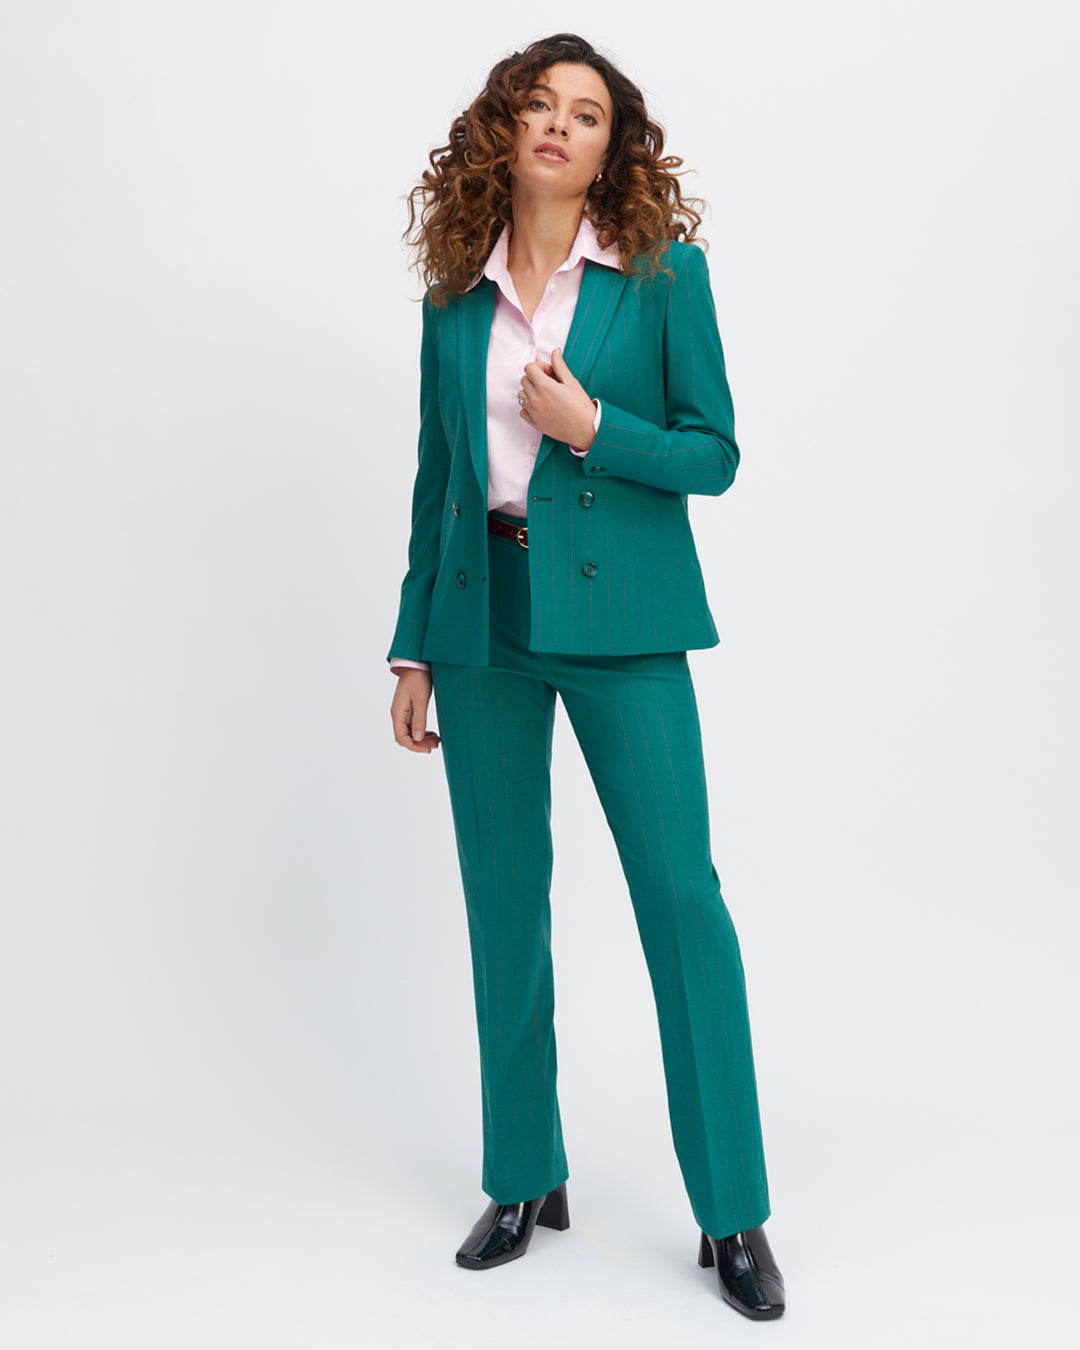 17H10-tailors-for-women-paris-green-jacket-emeraude-croisee-Double-buttoning-Two-pockets-sides-Two-pockets-interiors-Totally-double-